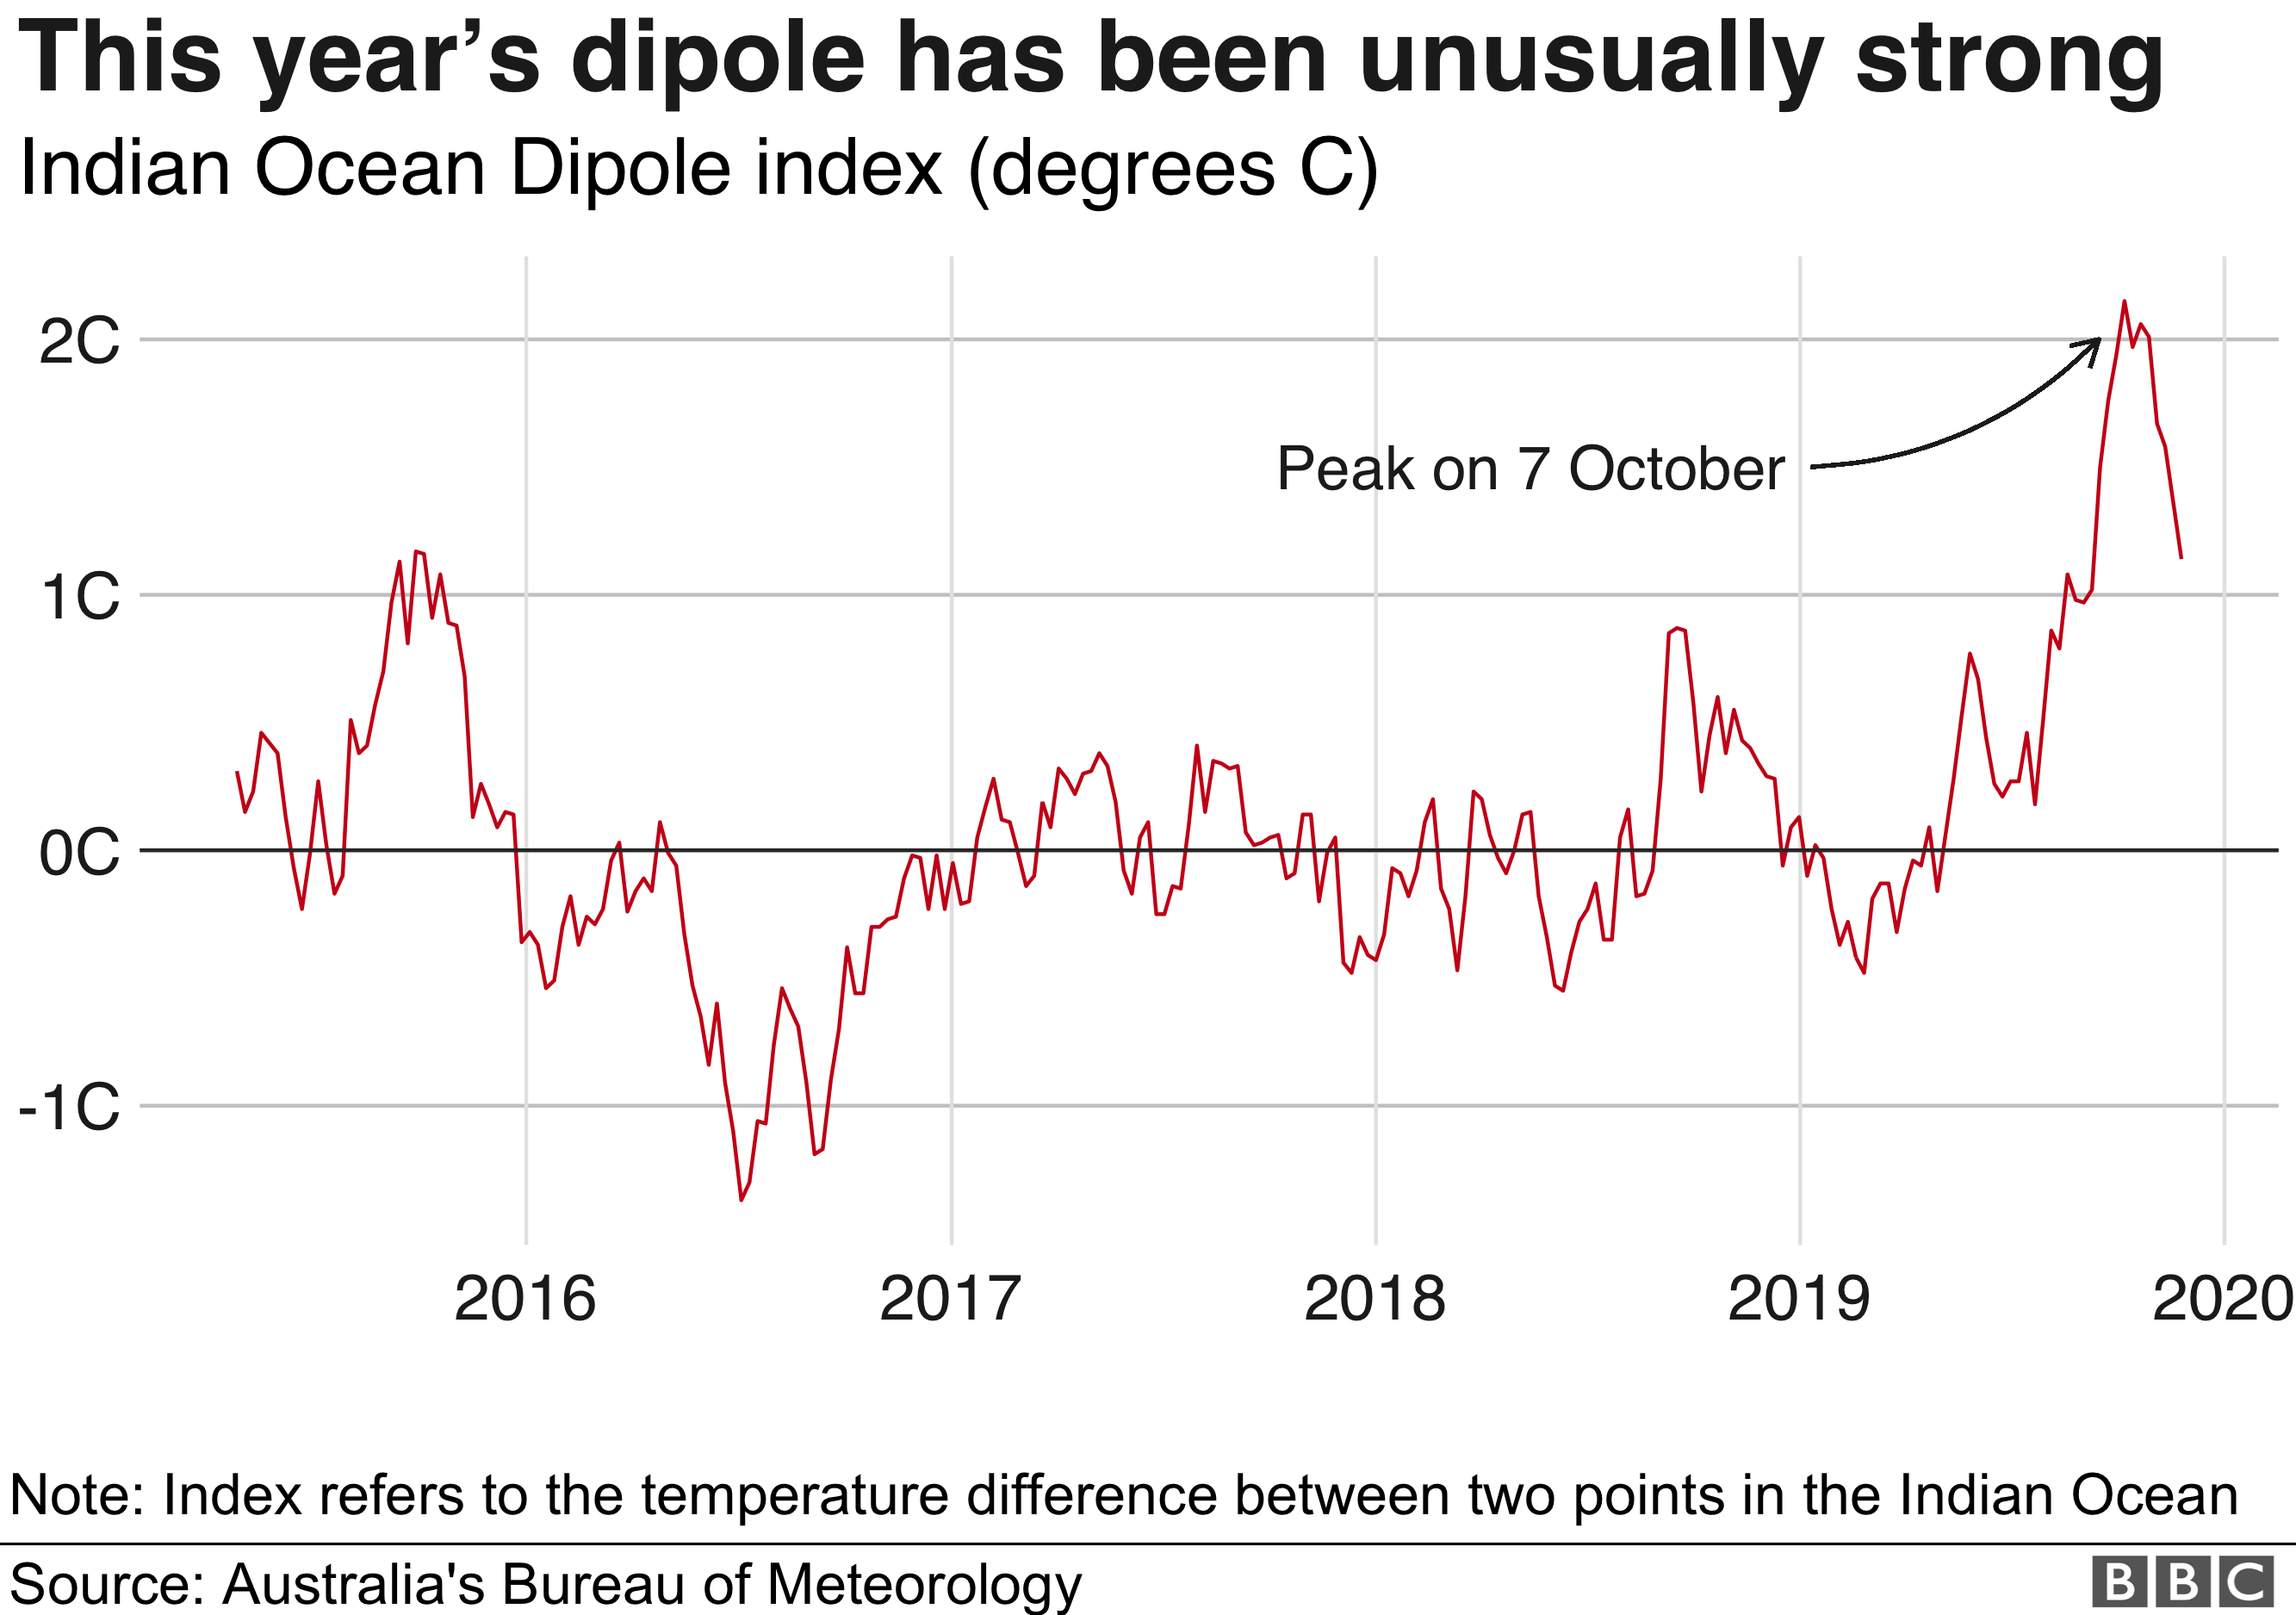 Chart showing the rising temperature difference between two points in the Indian Ocean - the Indian Ocean Dipole